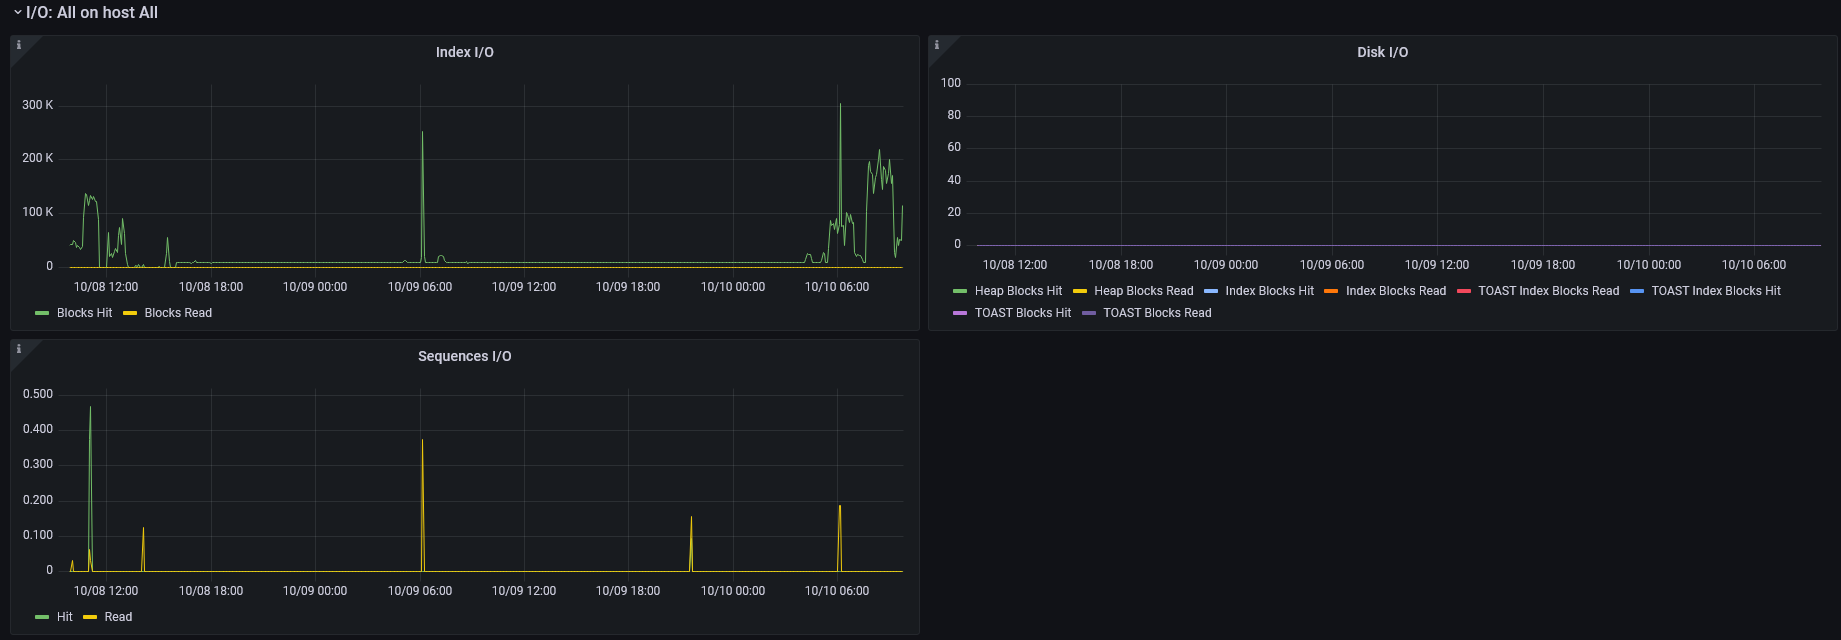 https://raw.githubusercontent.com/post-luxembourg/pgflux/v1.0.0.post1/docs/_images/grafana-dashboard-03.png